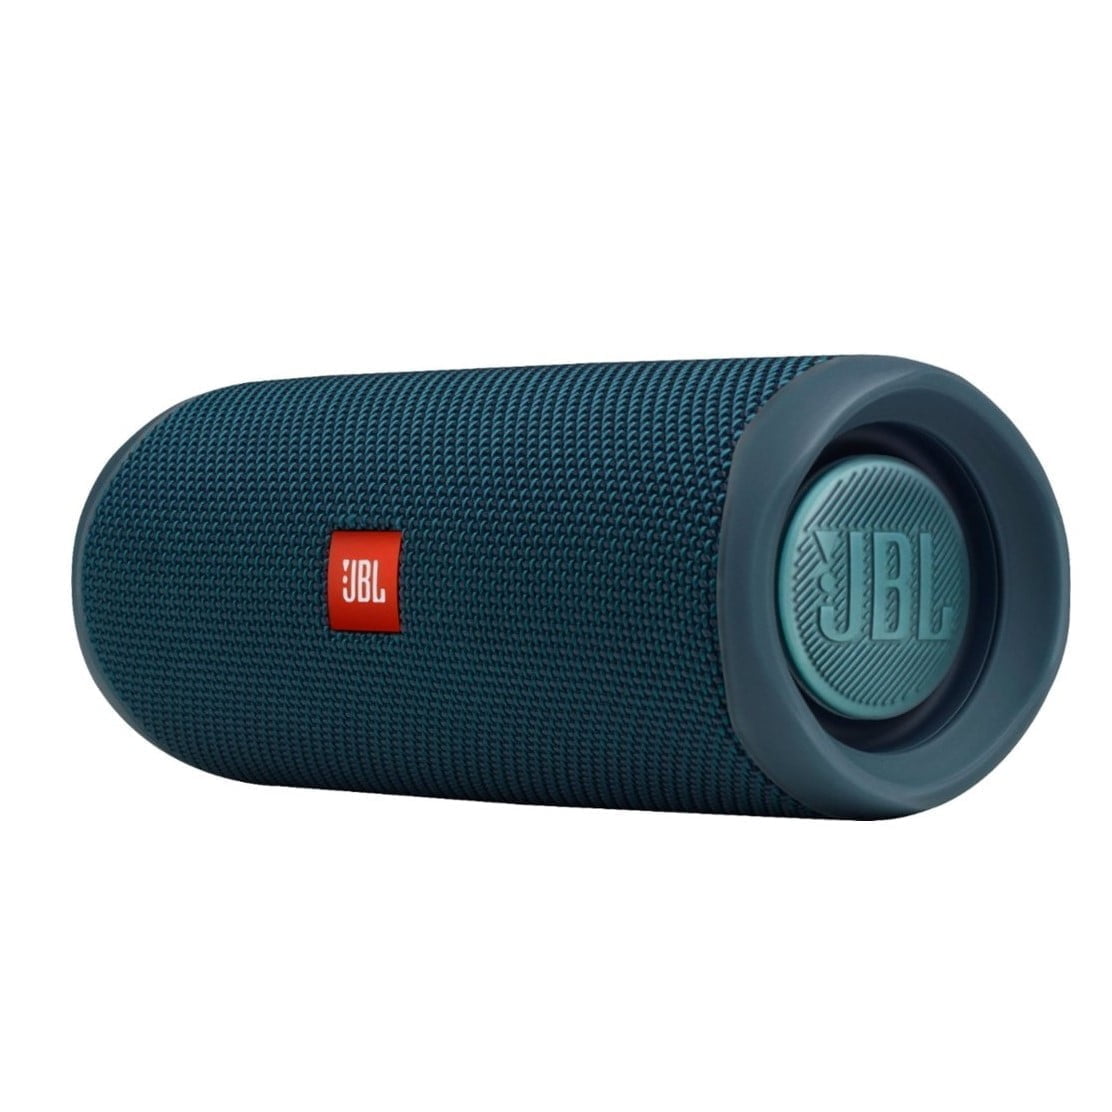 6356539 Sd Jbl &Amp;Lt;H1&Amp;Gt;Jbl Flip 5 Portable Bluetooth Wireless Speaker - Ocean Blue&Amp;Lt;/H1&Amp;Gt; Https://Www.youtube.com/Watch?V=C8K7Ldyhyfm &Amp;Lt;Ul&Amp;Gt; &Amp;Lt;Li&Amp;Gt;&Amp;Lt;Span Class=&Amp;Quot;A-List-Item&Amp;Quot;&Amp;Gt;Sounds Better Than Ever, Feel Your Music. Flip 5’S All New Racetrack-Shaped Driver Delivers High Output. Enjoy Booming, Bass In A Compact Package. &Amp;Lt;/Span&Amp;Gt;&Amp;Lt;/Li&Amp;Gt; &Amp;Lt;Li&Amp;Gt;&Amp;Lt;Span Class=&Amp;Quot;A-List-Item&Amp;Quot;&Amp;Gt; Make A Splash With Ipx7 Waterproof Design. Flip 5 Is Ipx7 Waterproof Up To Three-Feet Deep For Fearless Outdoor Entertainment. &Amp;Lt;/Span&Amp;Gt;&Amp;Lt;/Li&Amp;Gt; &Amp;Lt;Li&Amp;Gt;&Amp;Lt;Span Class=&Amp;Quot;A-List-Item&Amp;Quot;&Amp;Gt; Crank Up The Fun With Party Boost, Party Boost Allows You To Pair Two Jbl Party Boost-Compatible Speakers Together For Stereo, Sound Or To Pump Up Your Party. &Amp;Lt;/Span&Amp;Gt;&Amp;Lt;/Li&Amp;Gt; &Amp;Lt;Li&Amp;Gt;&Amp;Lt;Span Class=&Amp;Quot;A-List-Item&Amp;Quot;&Amp;Gt; Bring The Party Anywhere, Don’t Sweat The Small Stuff Like Charging Your Battery. Flip 5 Gives You More Than 12 Hours Of, Playtime. Keep The Music Going Longer And Louder With Jbl’s Signature Sound. &Amp;Lt;/Span&Amp;Gt;&Amp;Lt;/Li&Amp;Gt; &Amp;Lt;/Ul&Amp;Gt; Jbl Flip5 Jbl Flip 5 Portable Bluetooth Wireless Speaker - Ocean Blue